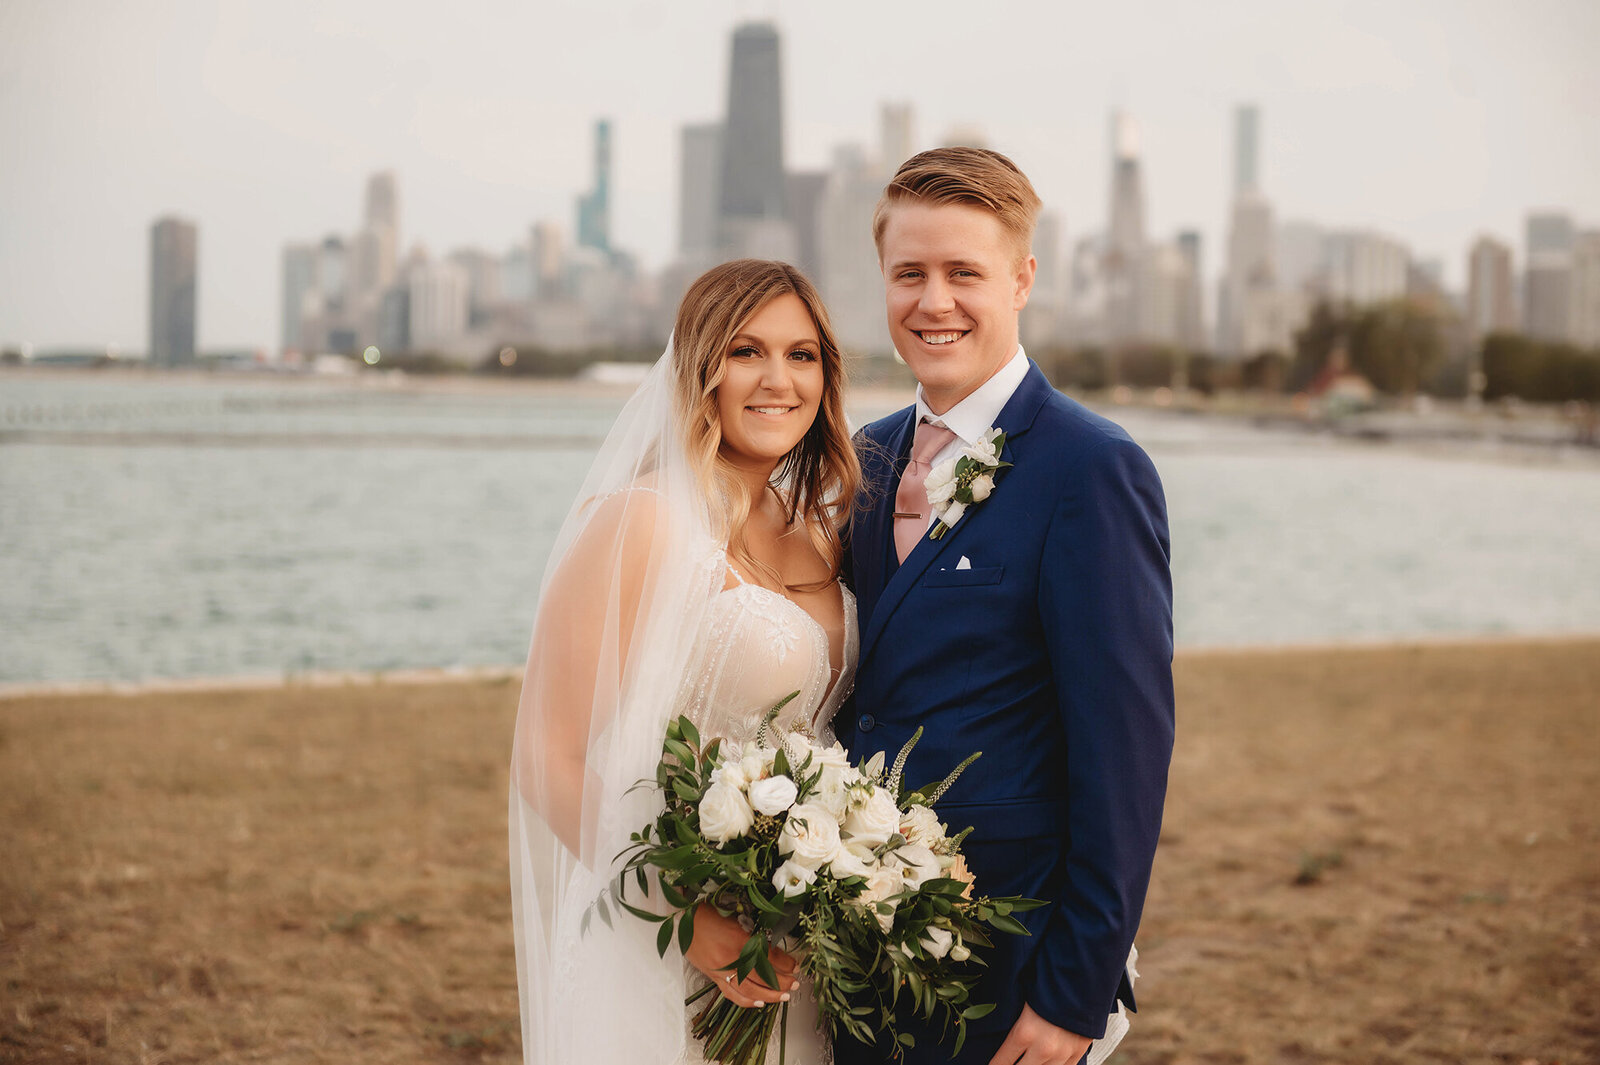 Newlyweds pose for Wedding Photos in Chicago, IL.